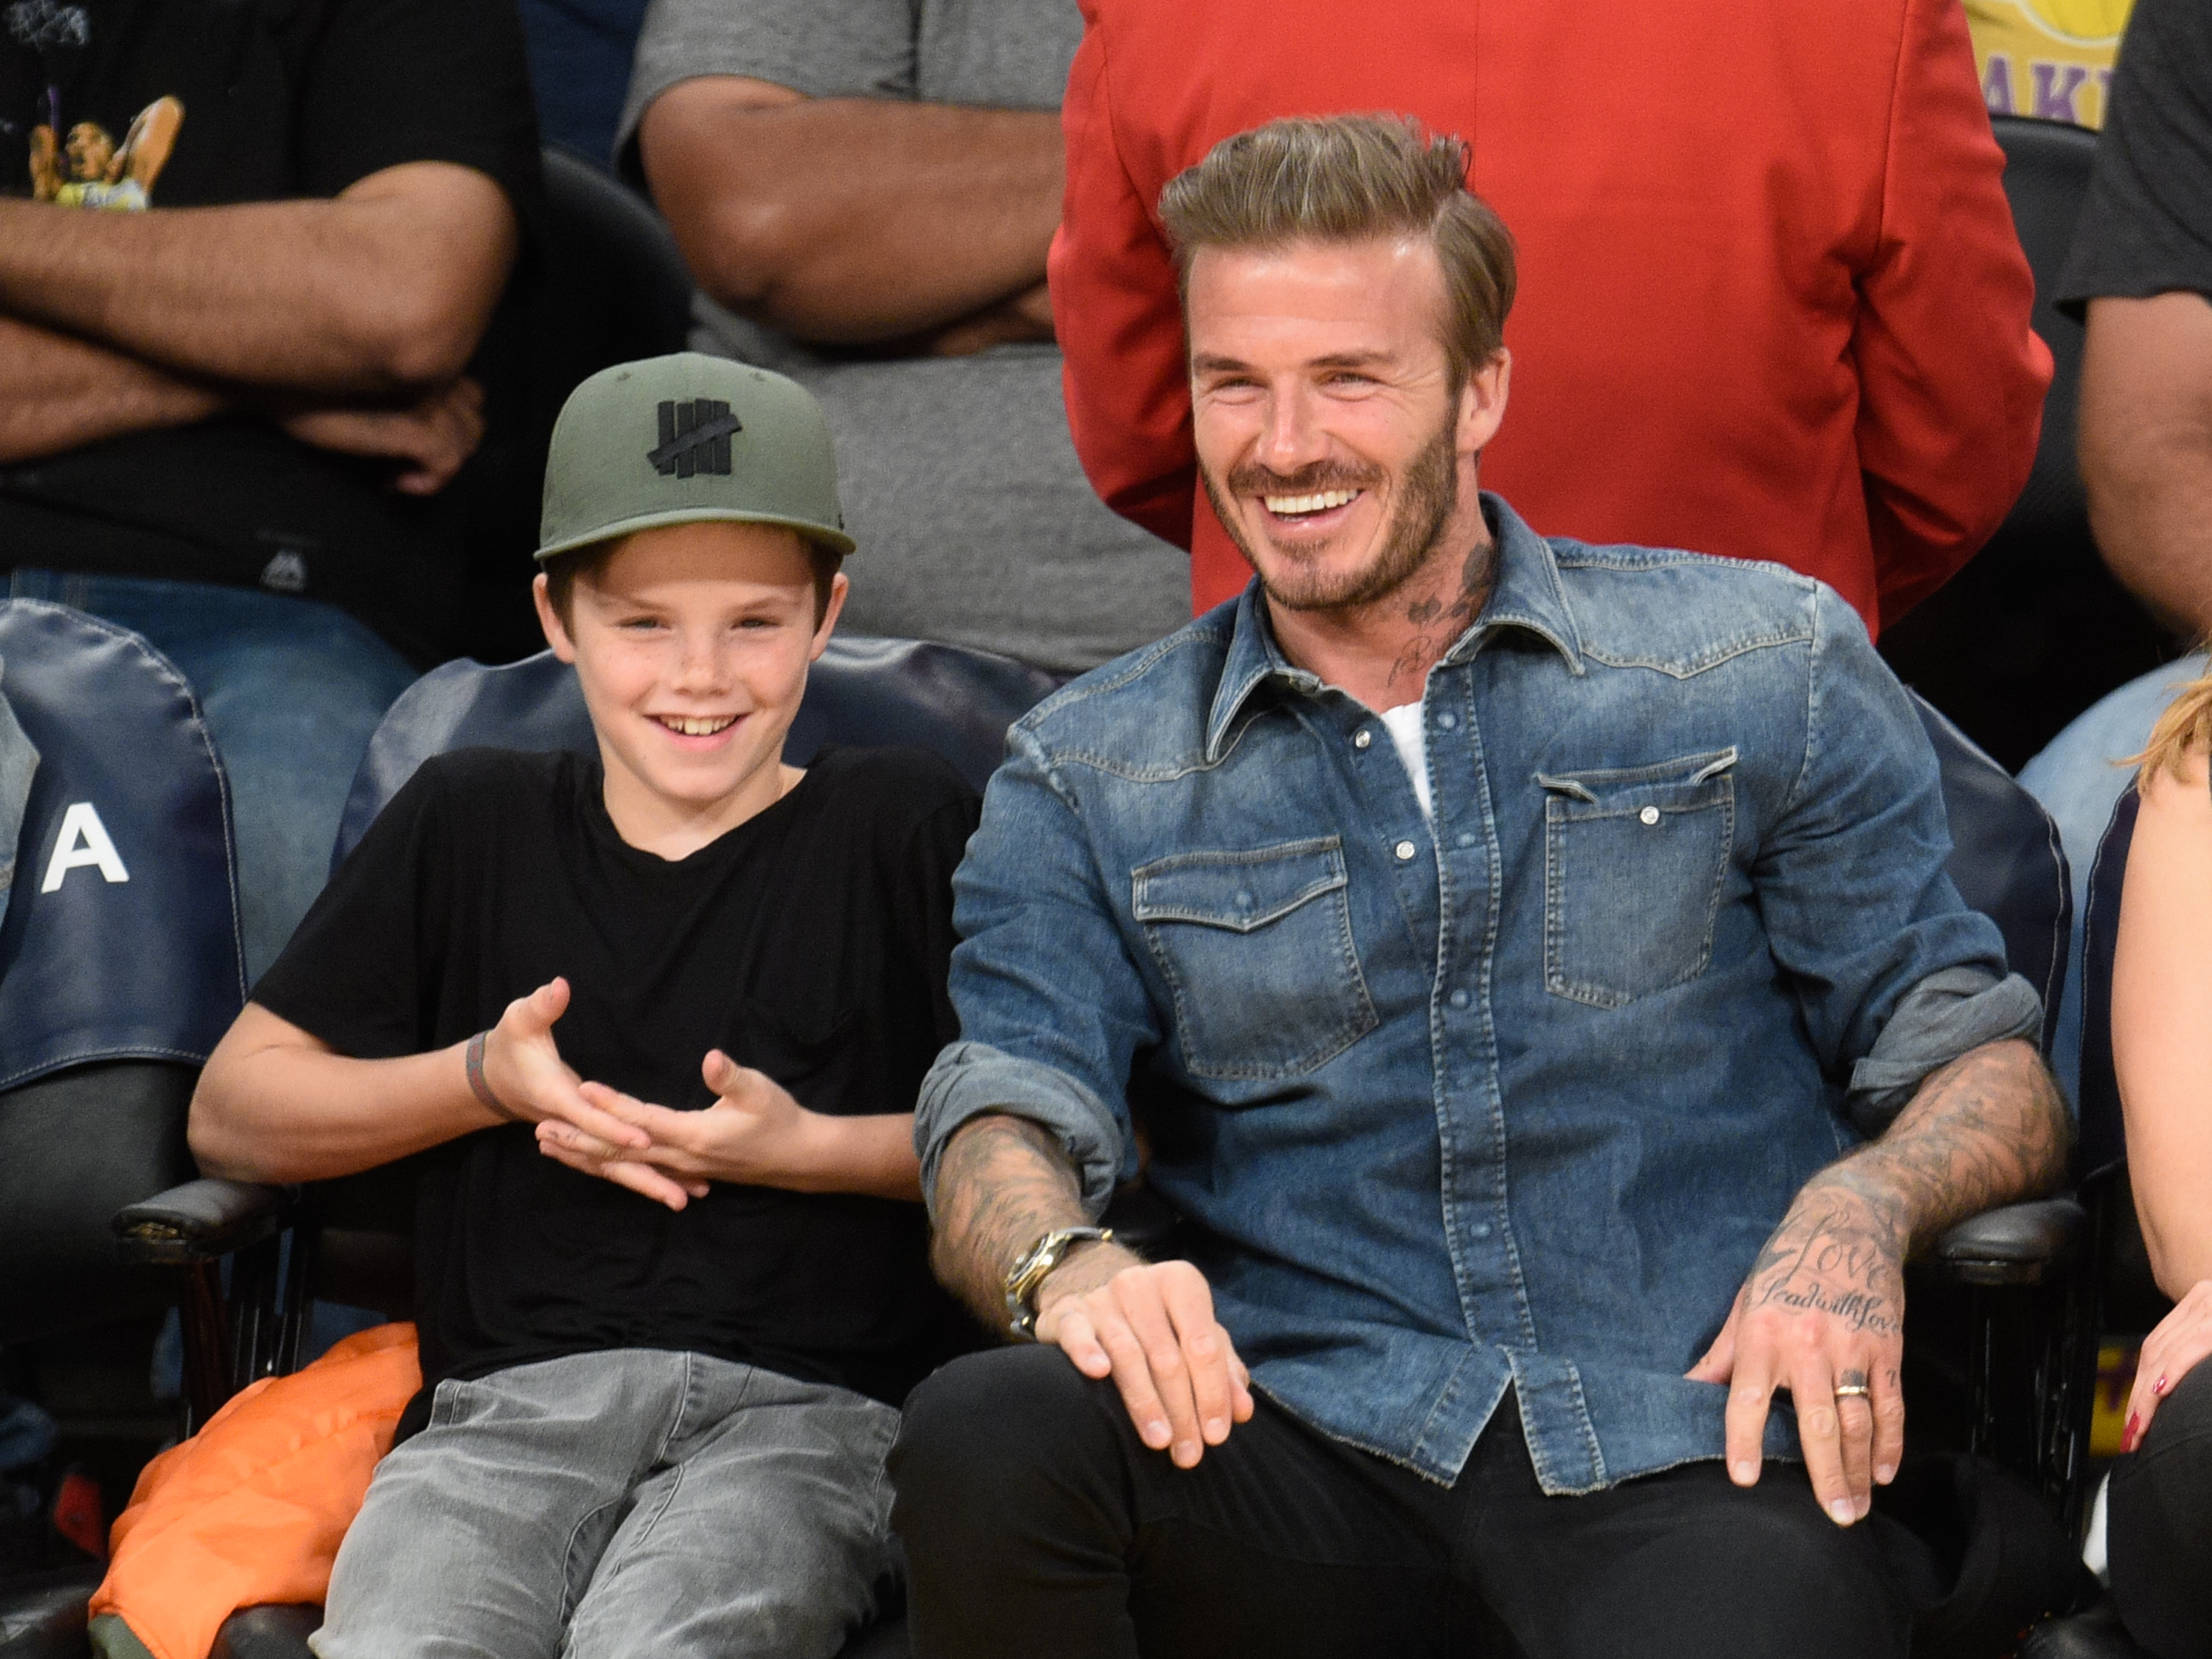 Cruz Beckham and David Beckham at a basketball game between the Boston Celtics and the Los Angeles Lakers in Los Angeles, California on April 3, 2016 | Source: Getty Images